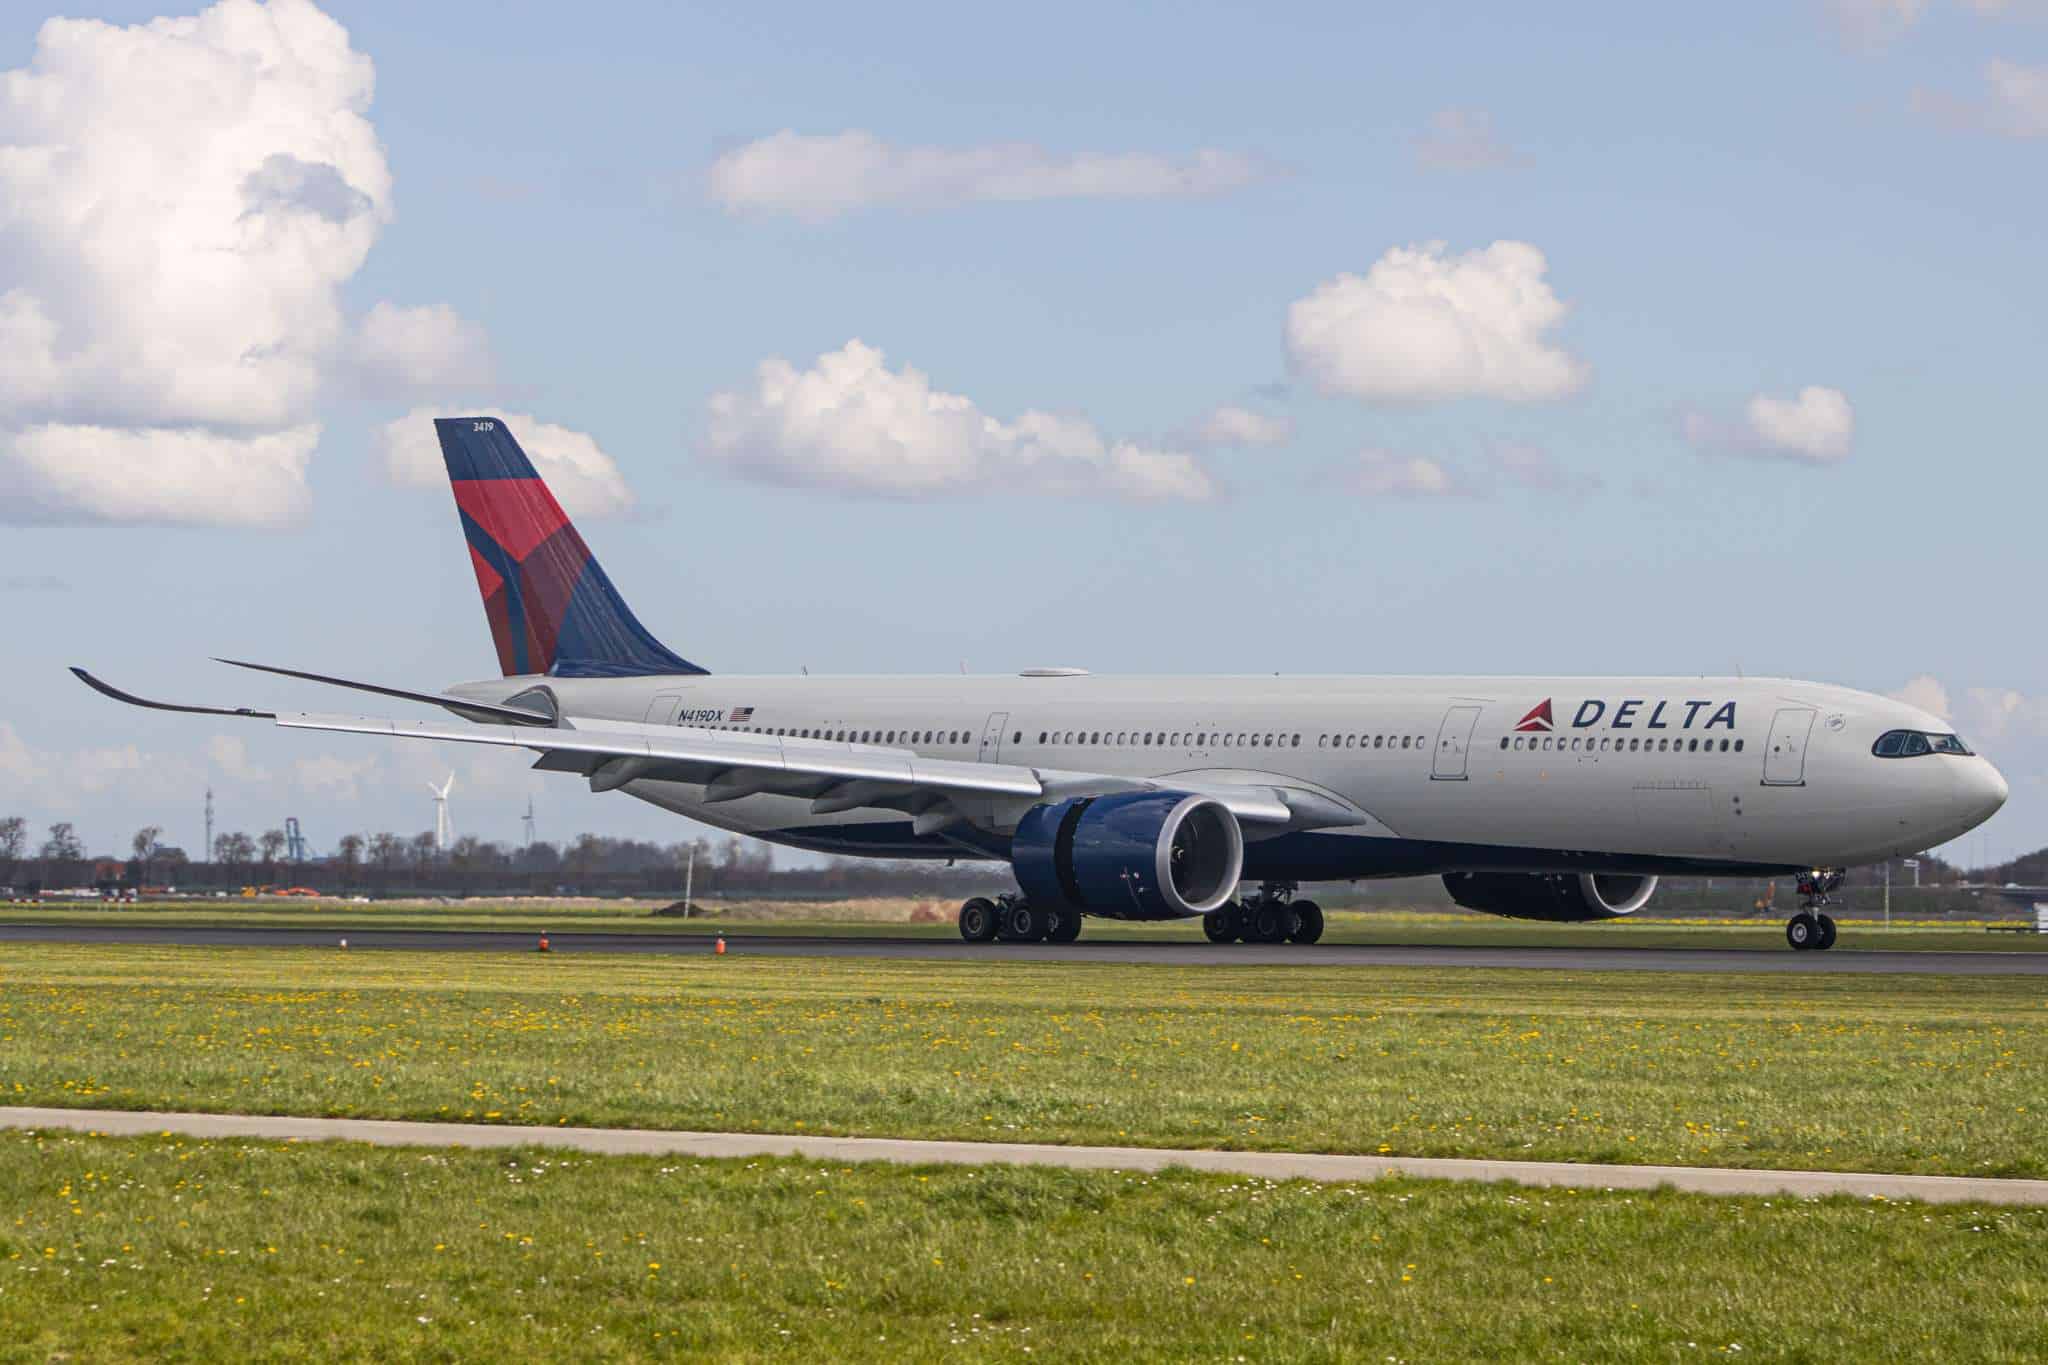 In the early hours of this morning, a Delta Airbus A330neo from New York to Amsterdam declared an emergency and diverted to London Heathrow.